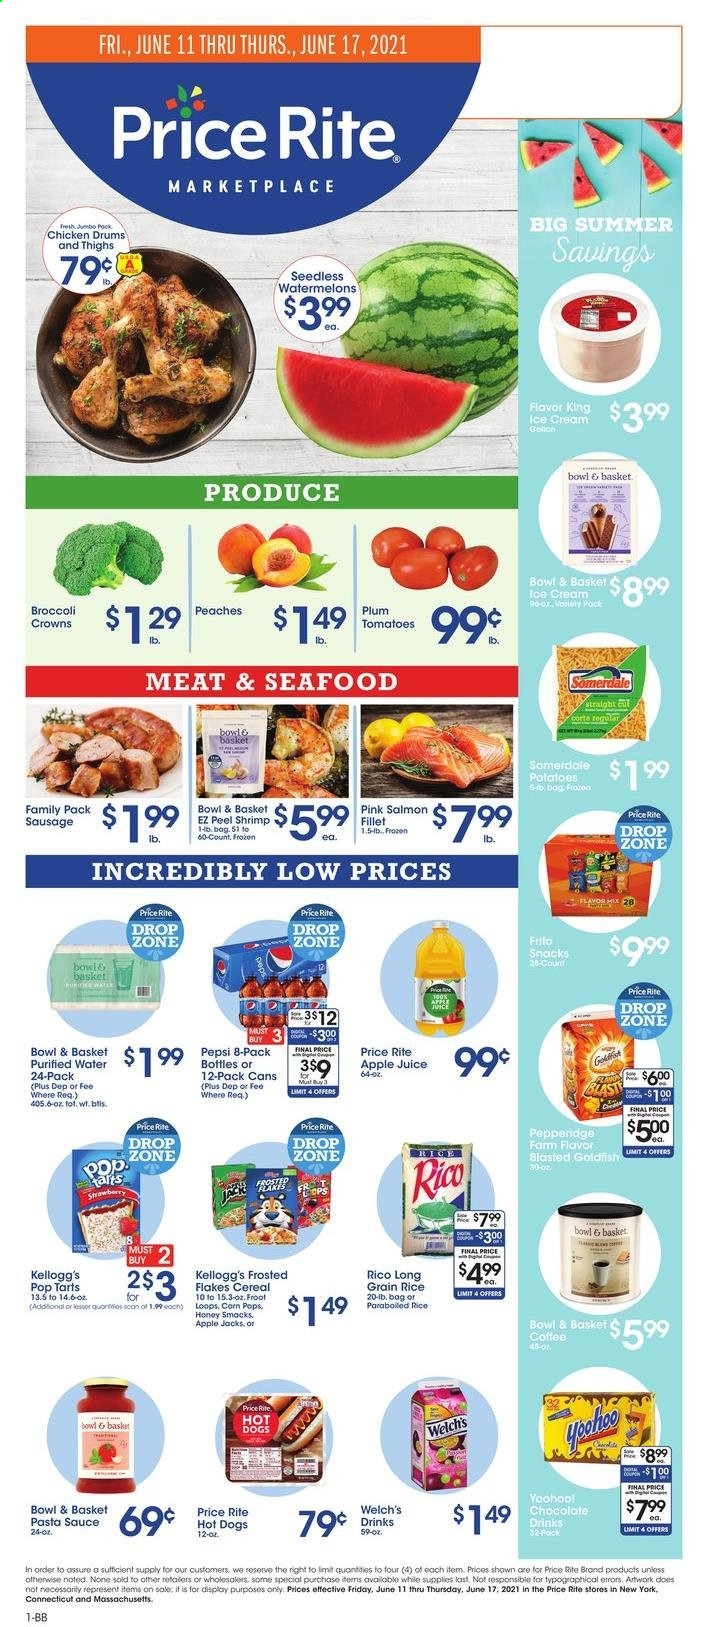 thumbnail - Price Rite Flyer - 06/11/2021 - 06/17/2021 - Sales products - Bowl & Basket, tomatoes, potatoes, Welch's, salmon, seafood, shrimps, hot dog, pasta sauce, sauce, sausage, ice cream, snack, Kellogg's, Pop-Tarts, cereals, Frosted Flakes, Corn Pops, rice, long grain rice, honey, apple juice, Pepsi, juice, purified water, chocolate drink, coffee, gallon, peaches. Page 1.